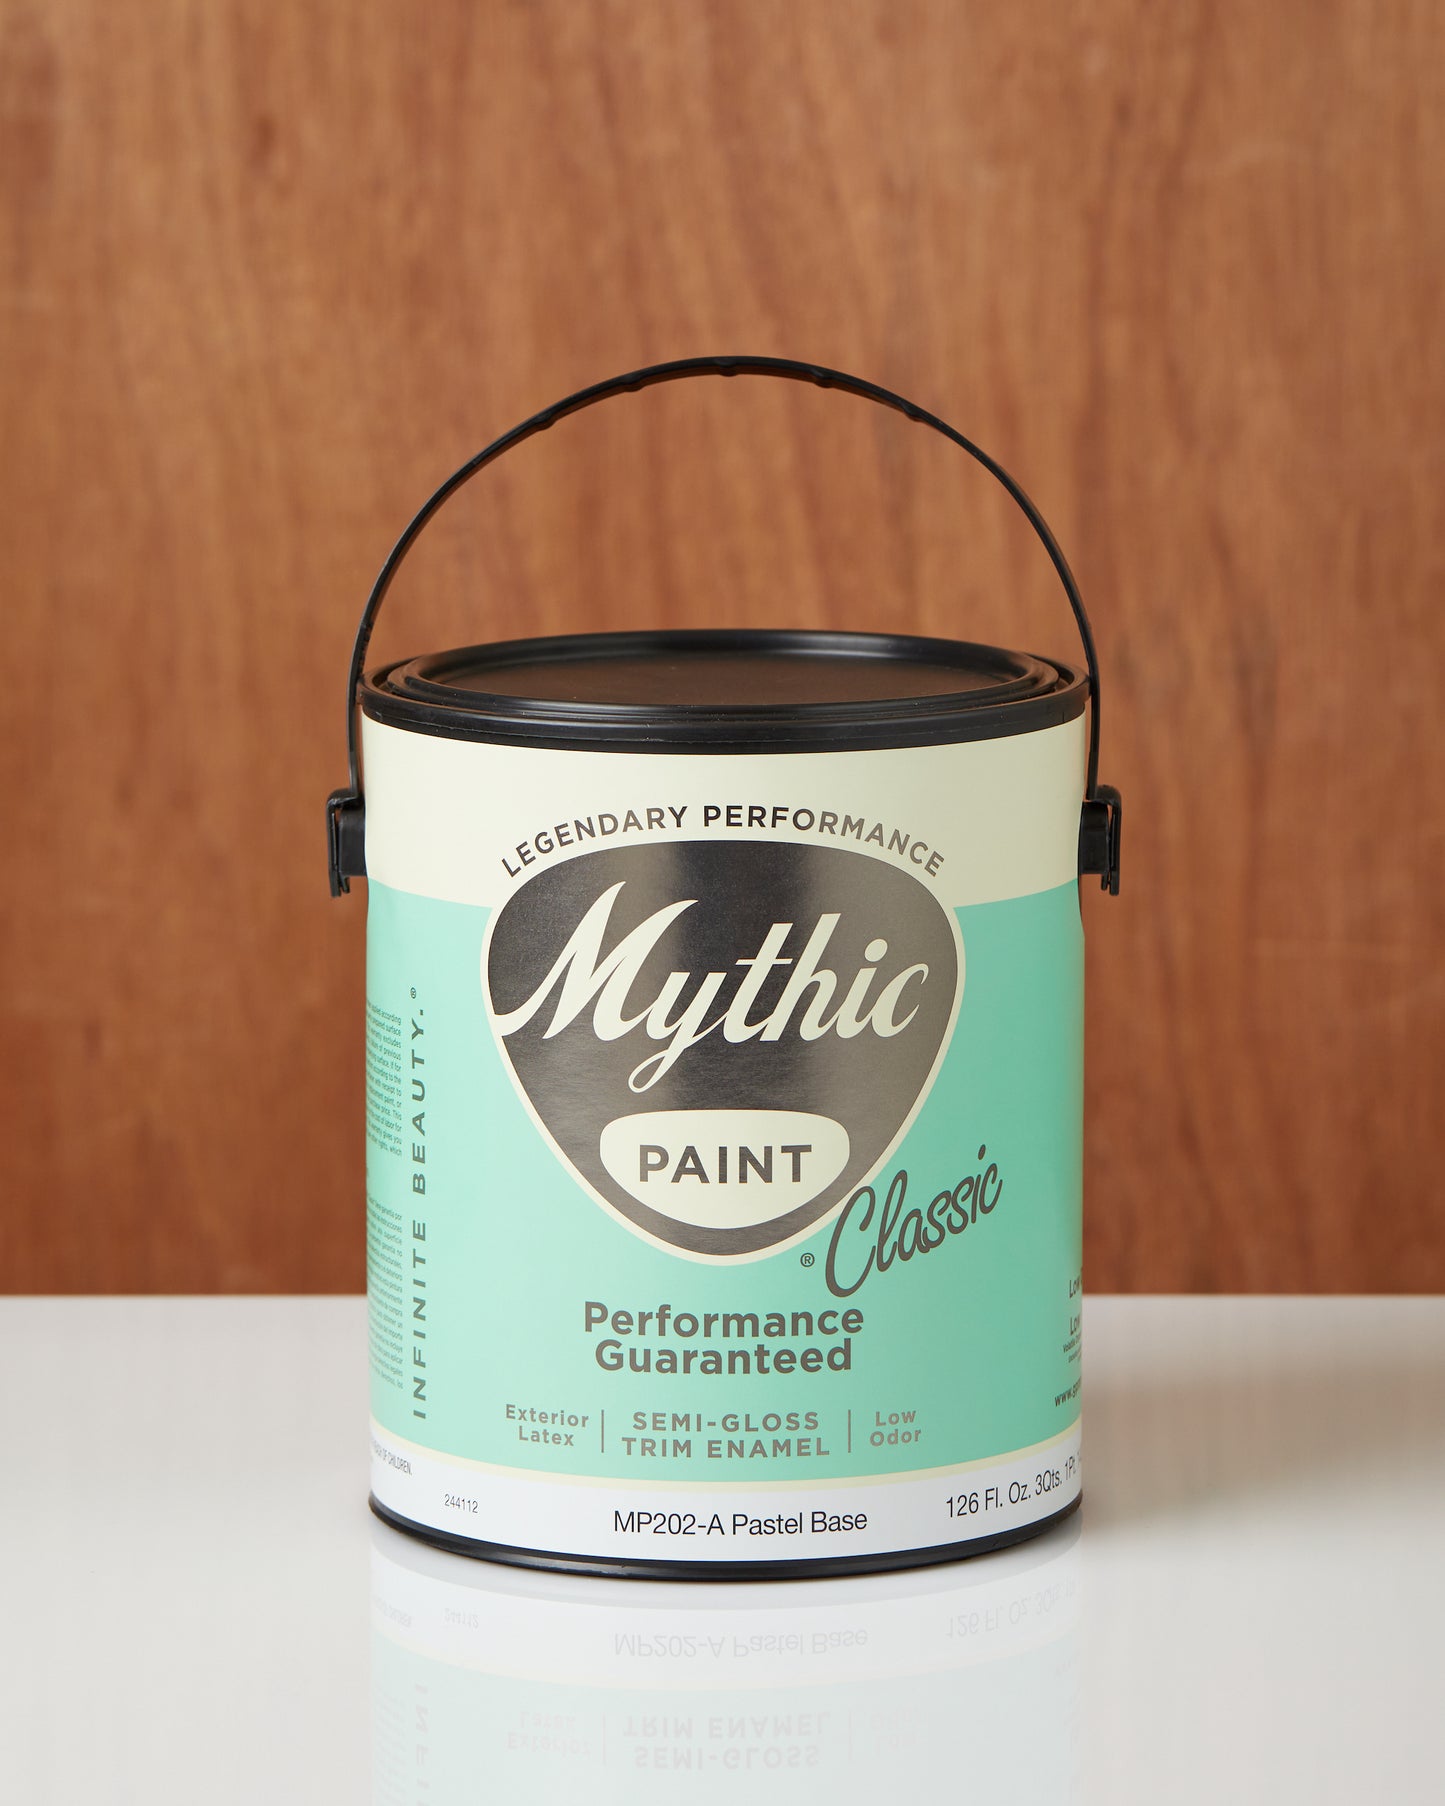 Mythic Paint - Classic Exterior Latex Low Odor Paint